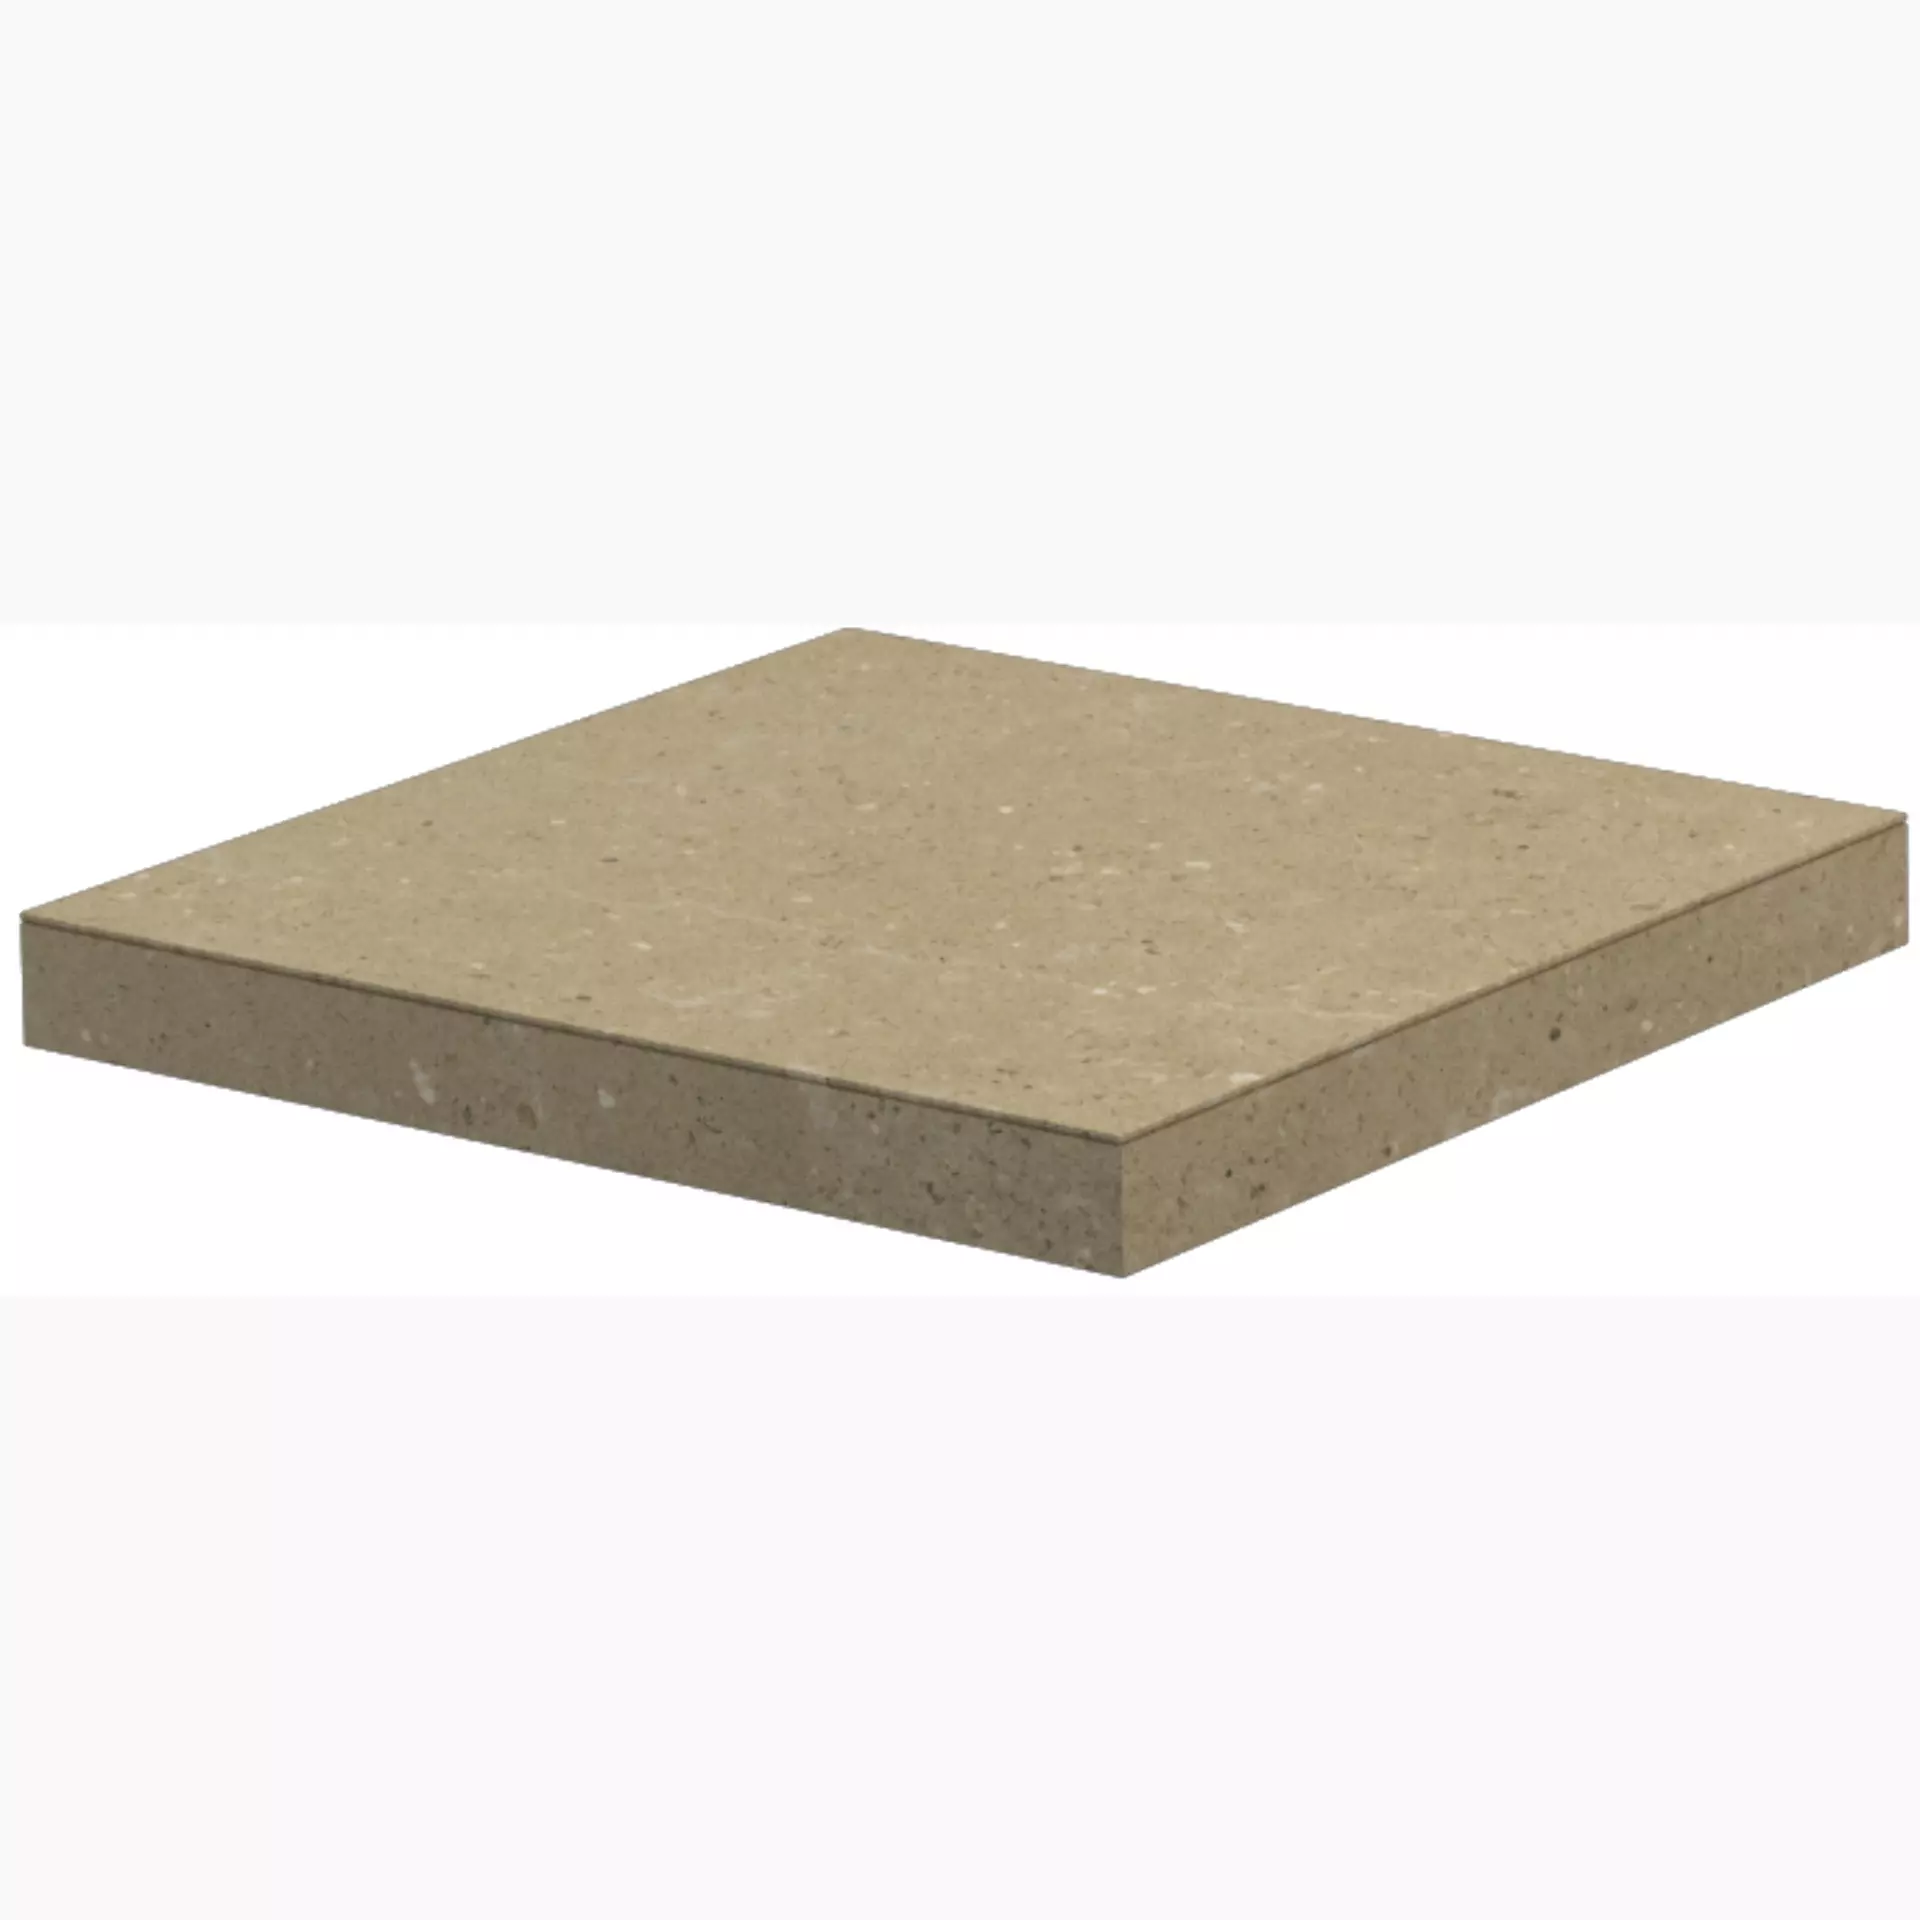 Del Conca Hwd Wild Beige Hwd01 Naturale Corner plate Step Right G3WD01RGD 33x33cm rectified 8,5mm